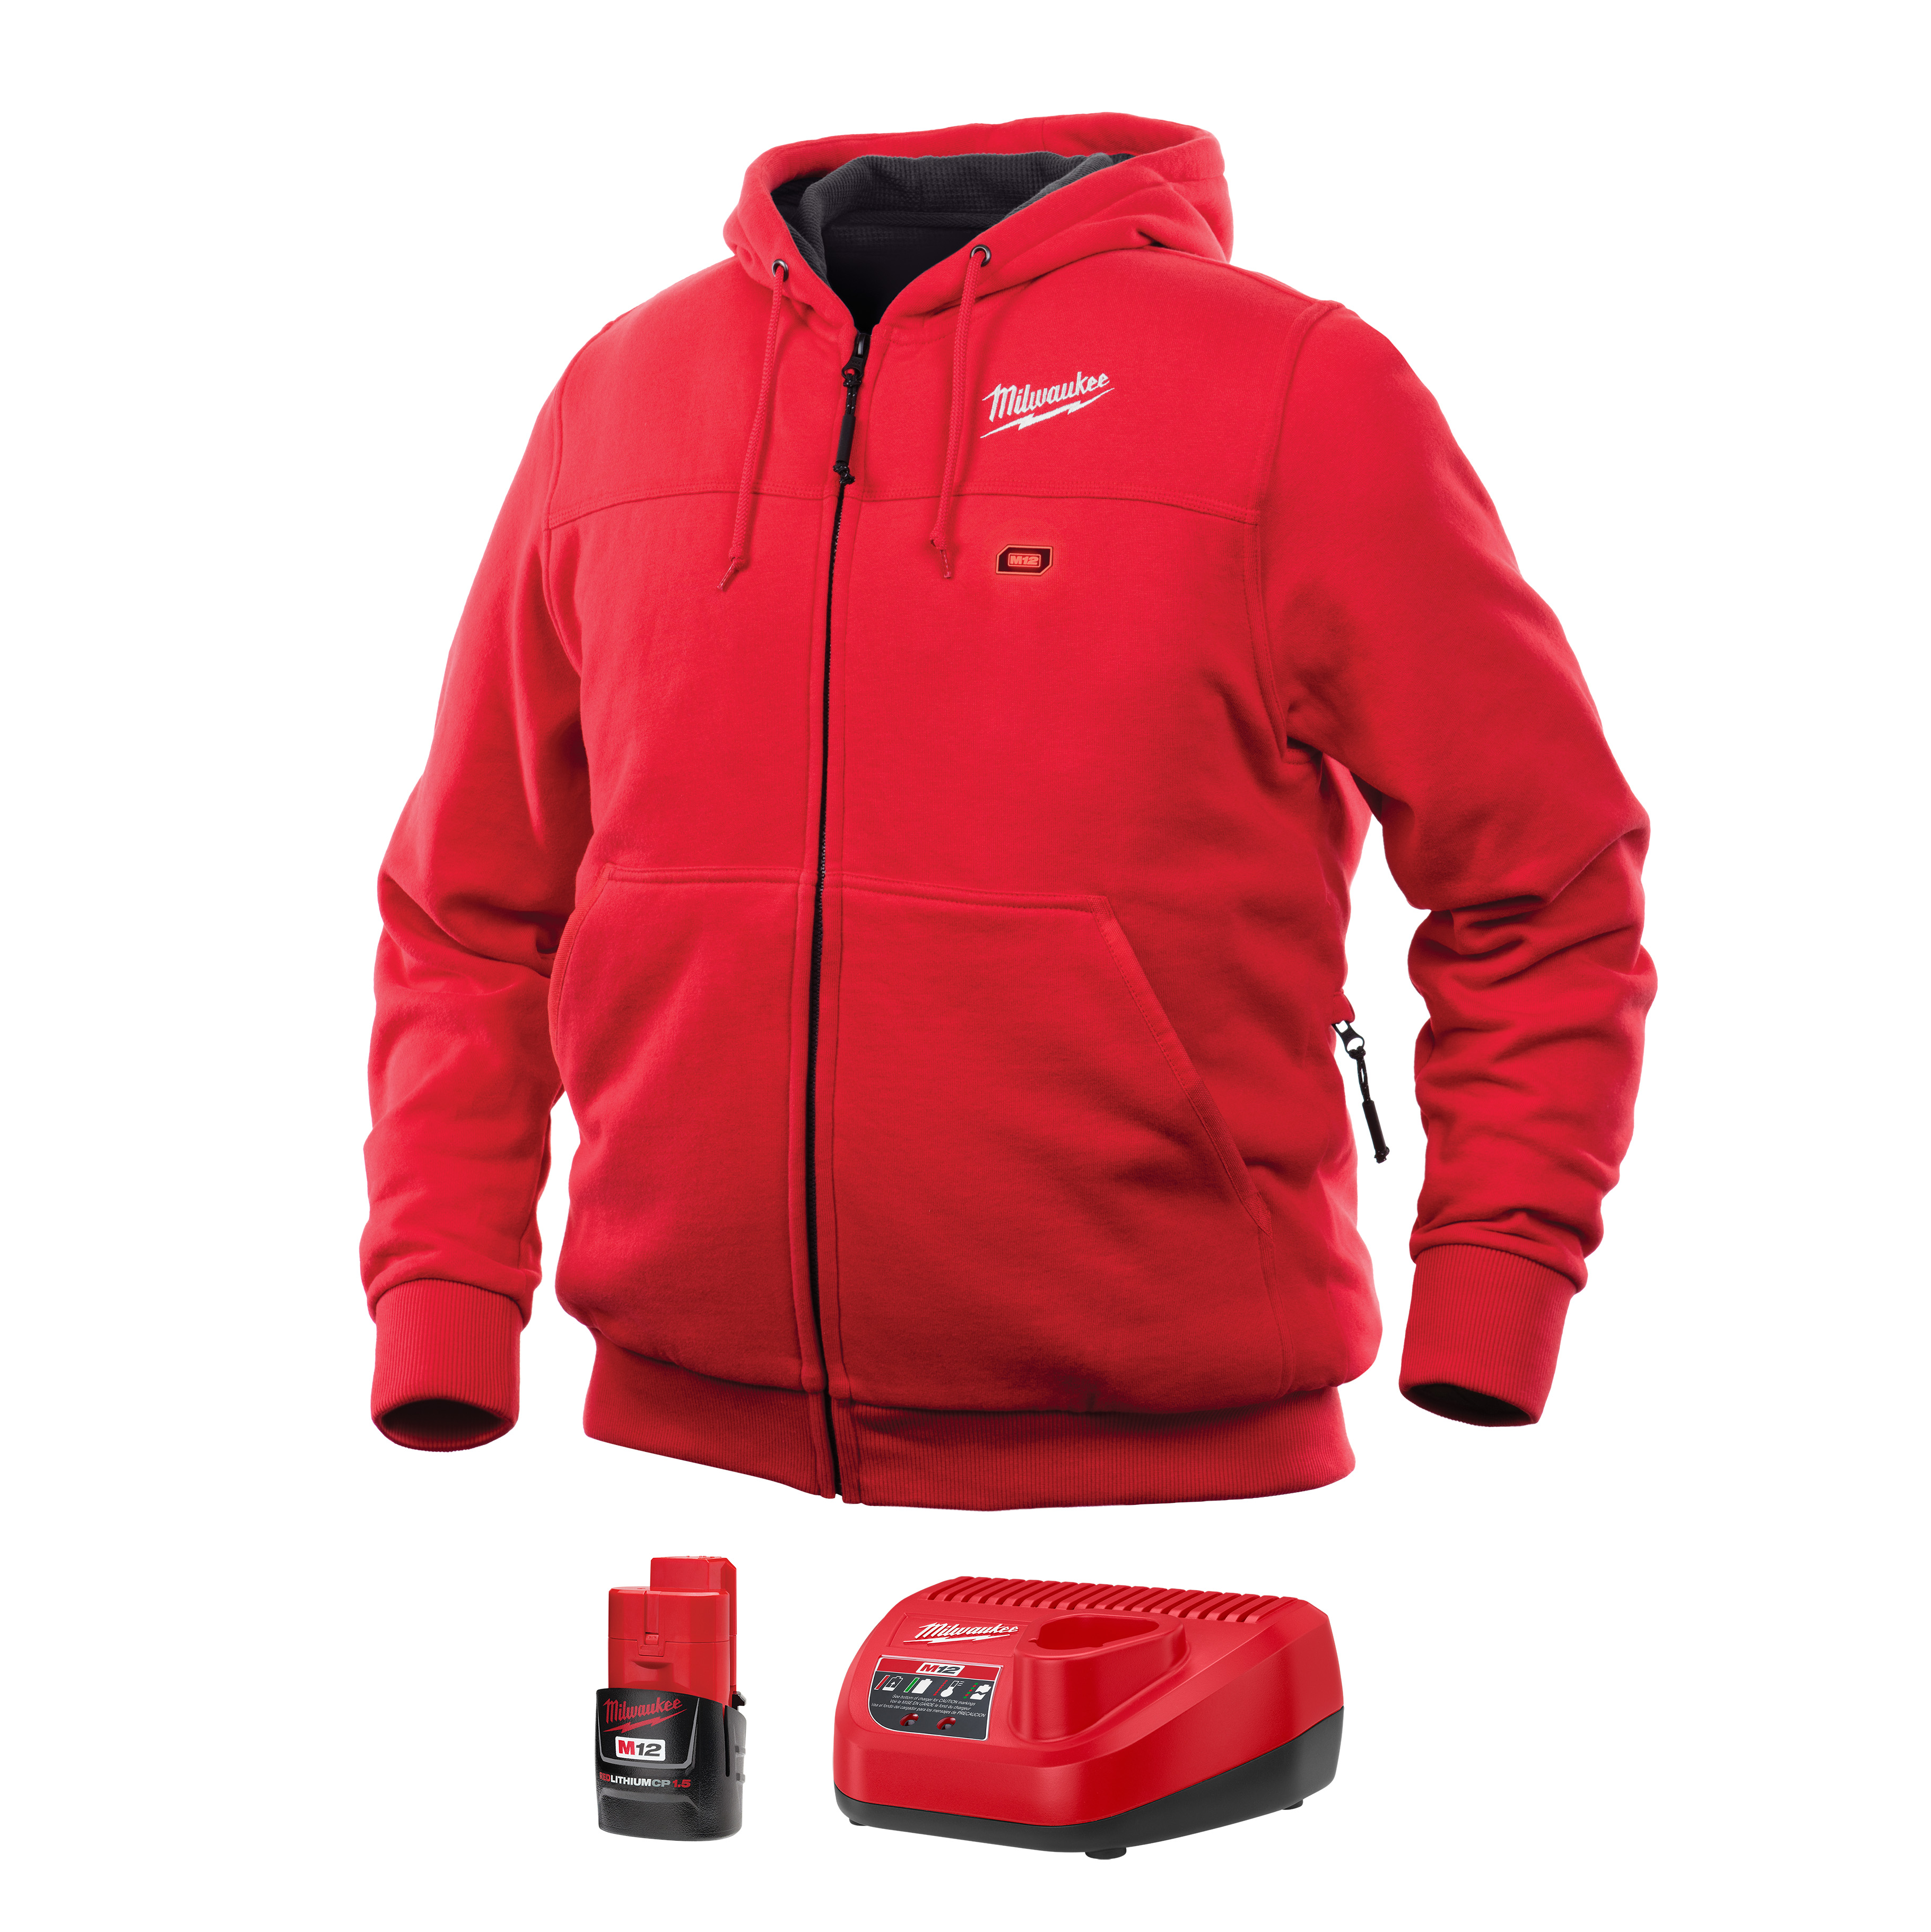 Powered by M12™ REDLITHIUM™ battery technology, Milwaukee® M12™ heated hoodies use carbon fiber heating elements to create and distribute heat to the chest and back. A one-touch LED controller allows users to select from three heat settings, delivering ideal heat for any environment. The new quick-heat function allows users to feel heat 3X faster than previous hoodies and market competitors. Combining a durable cotton/polyester exterior with a waffle weave thermal lining, the hoodie provides a versatile three-season solution to keep heat in and allow users to shed bulky layers.